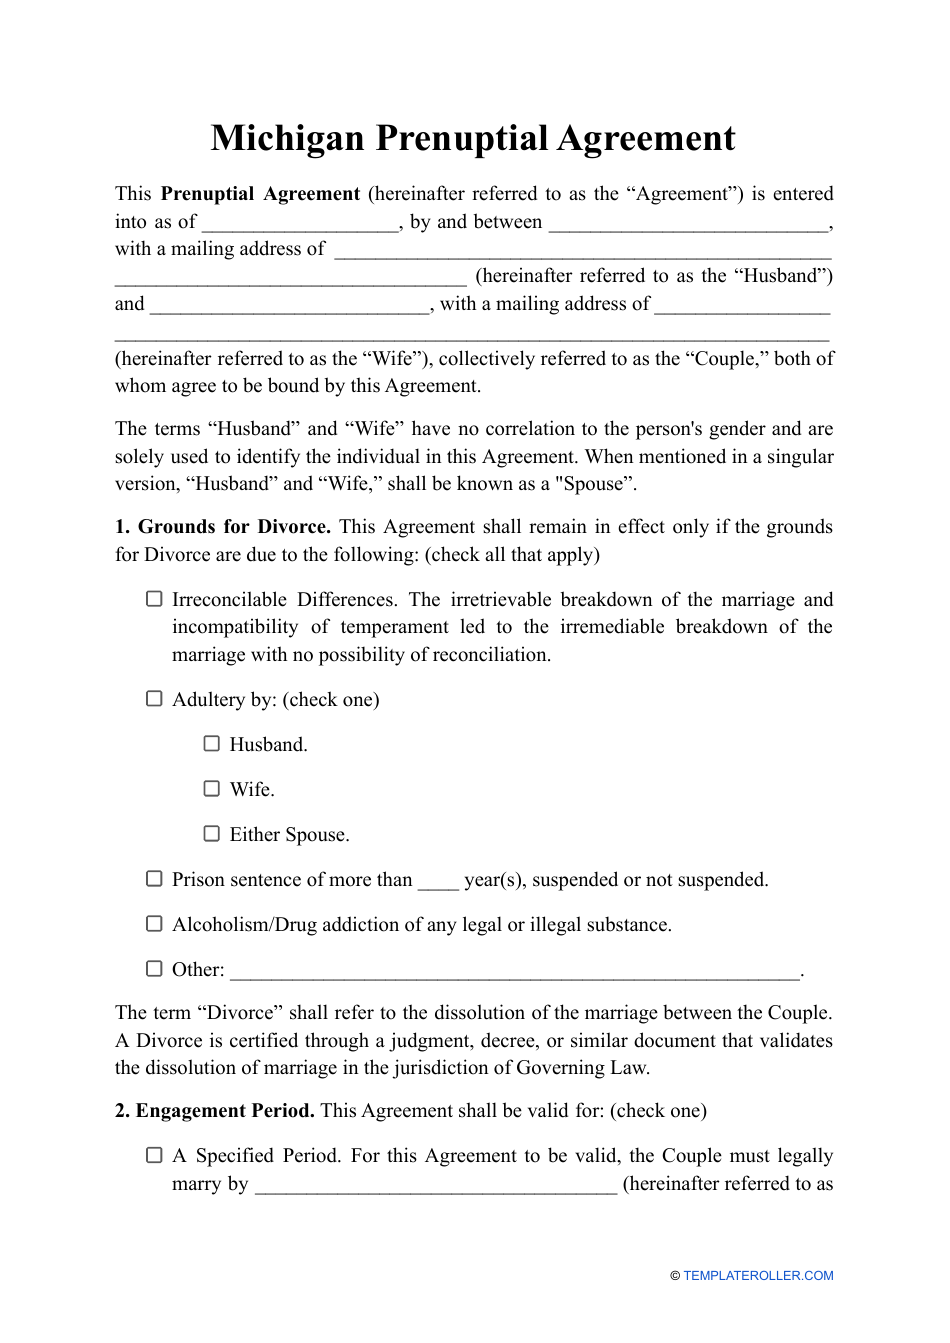 Michigan Prenuptial Agreement Template Fill Out Sign Online and